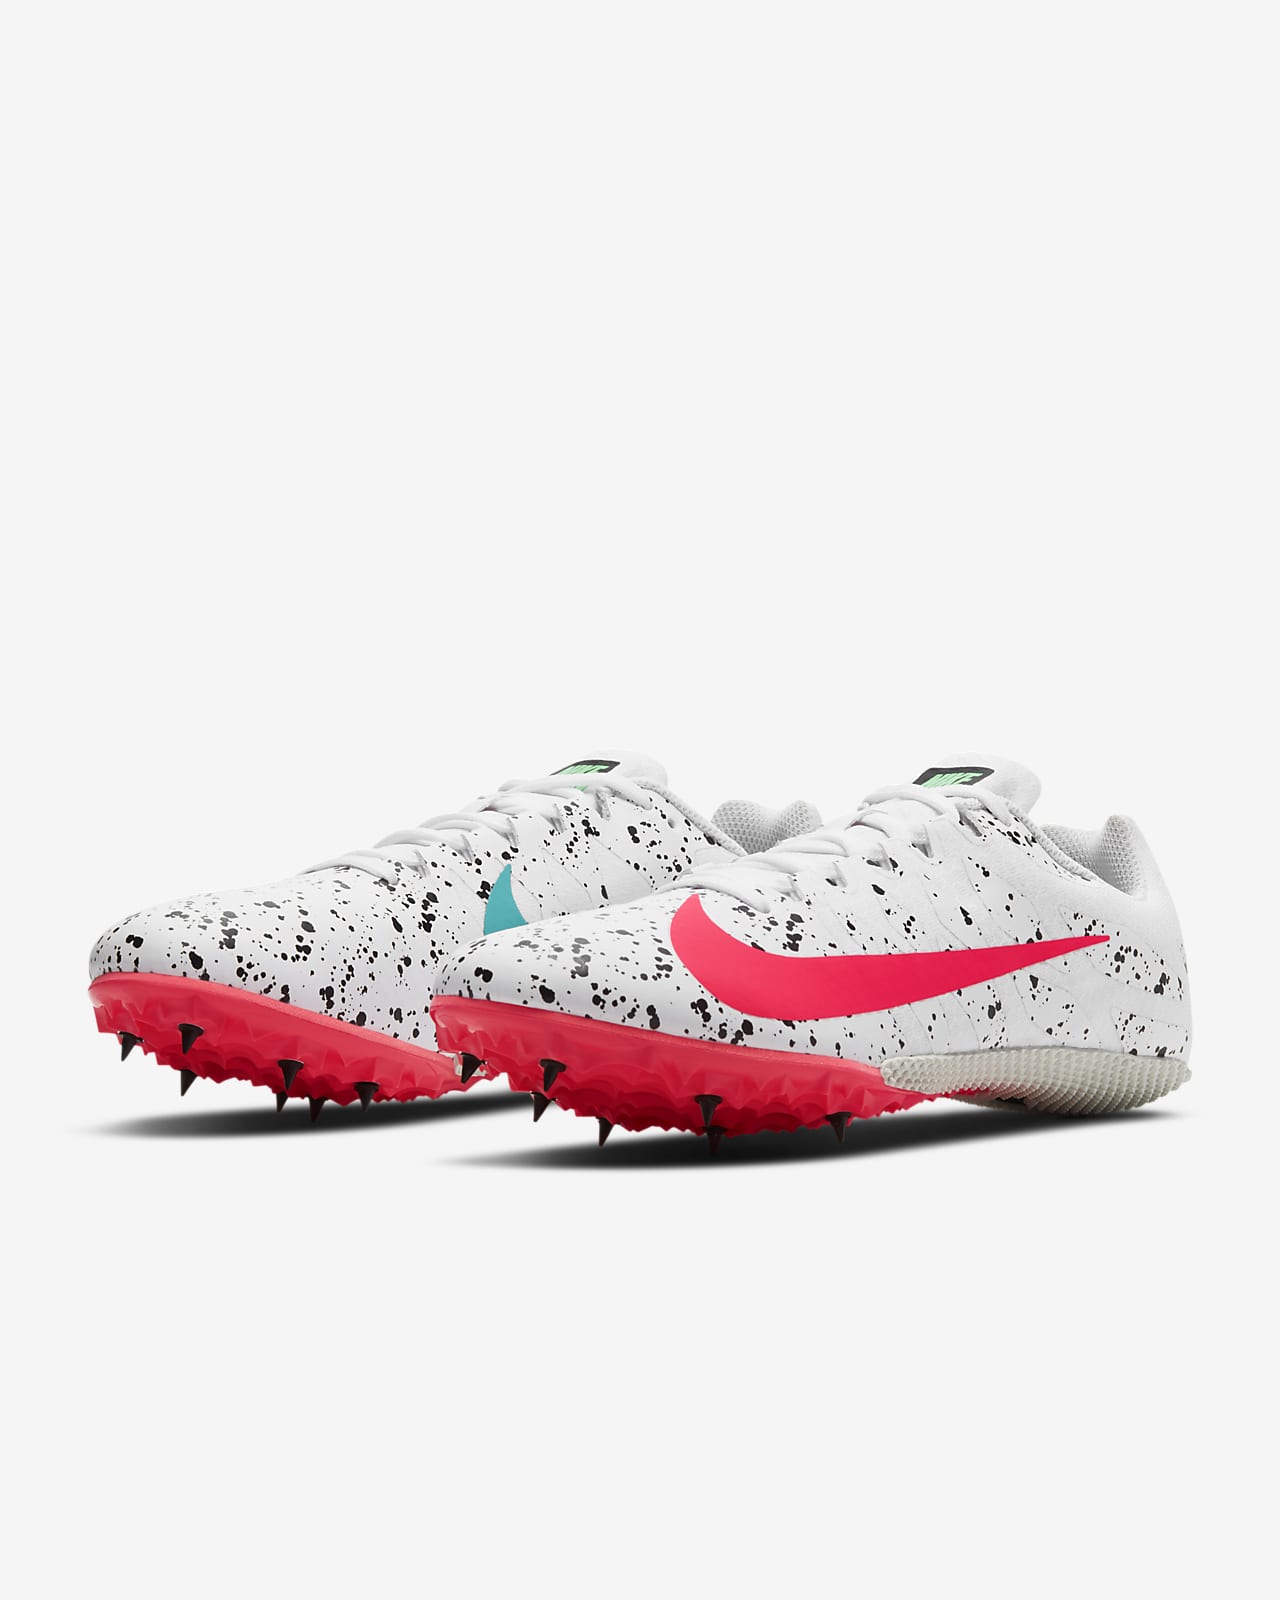 nike zoom rival s9 spikes